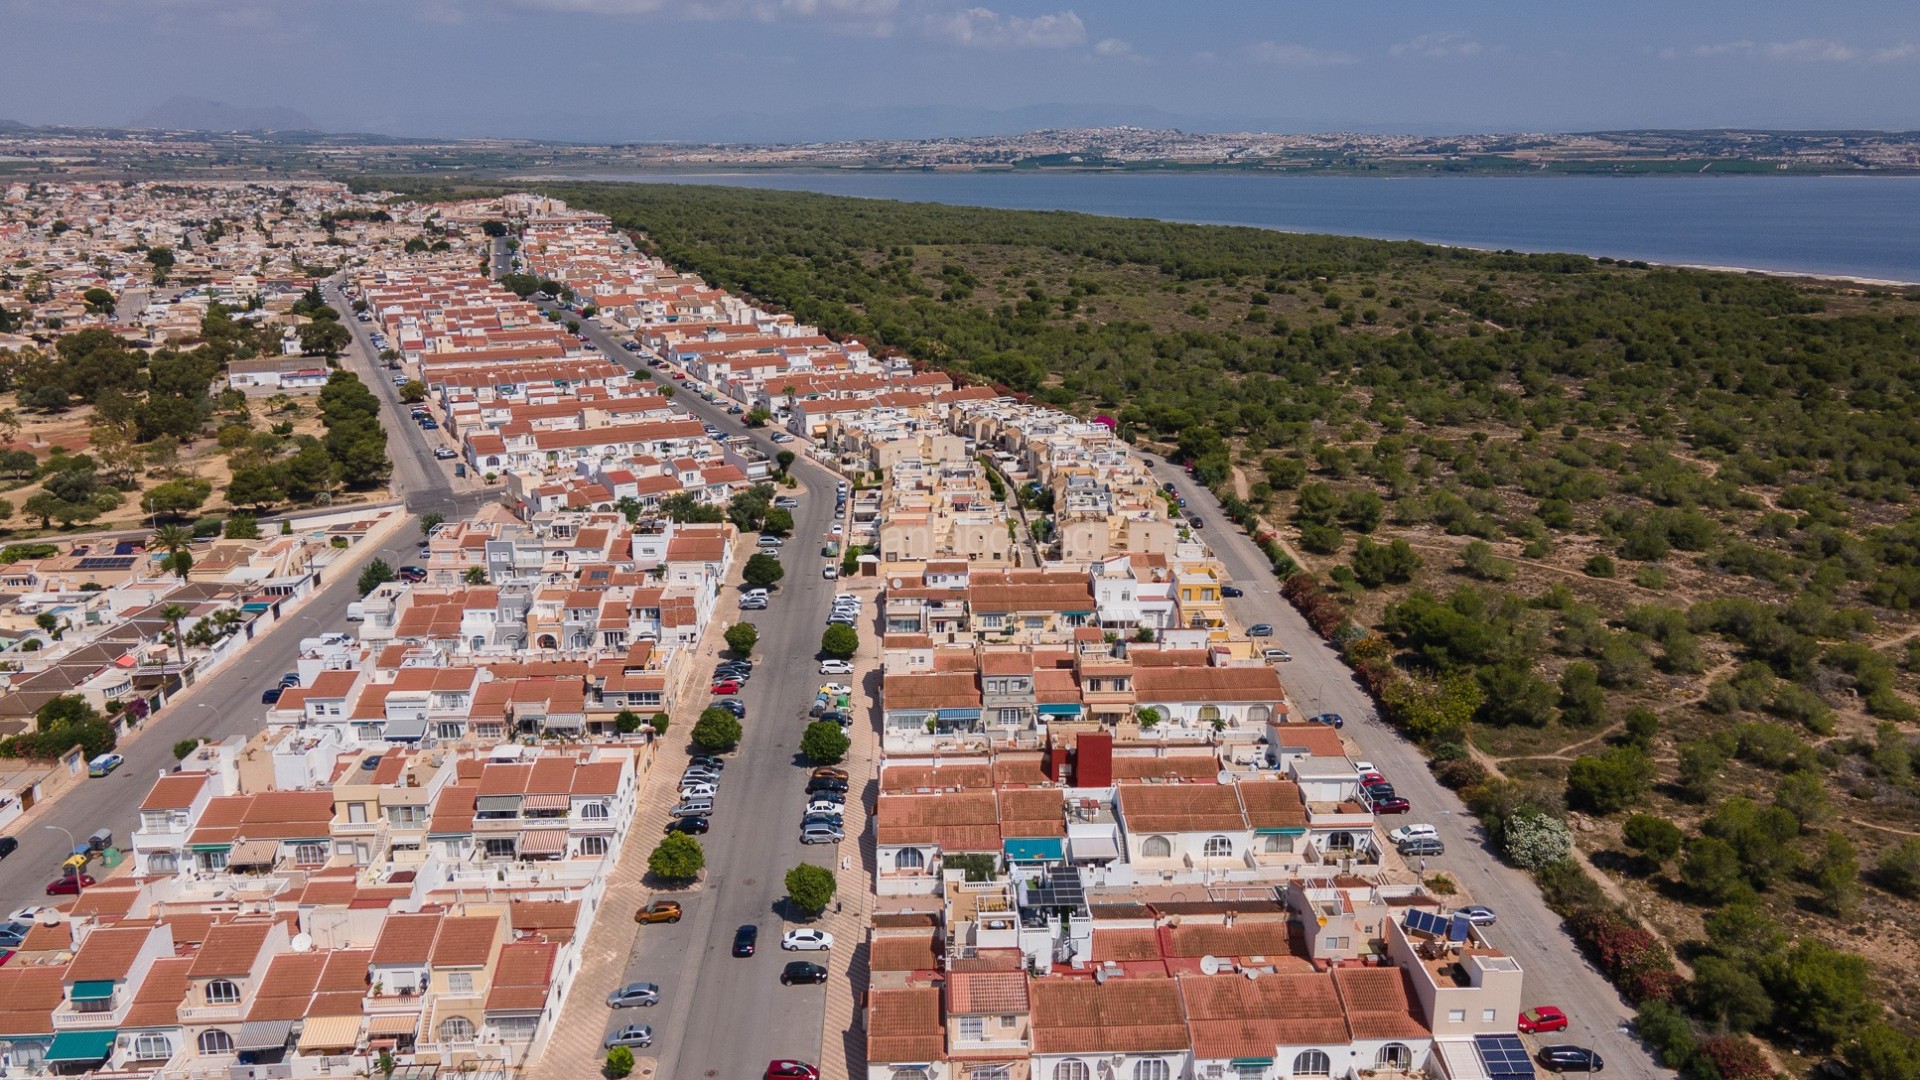 Resale - Townhouse -
Torrevieja